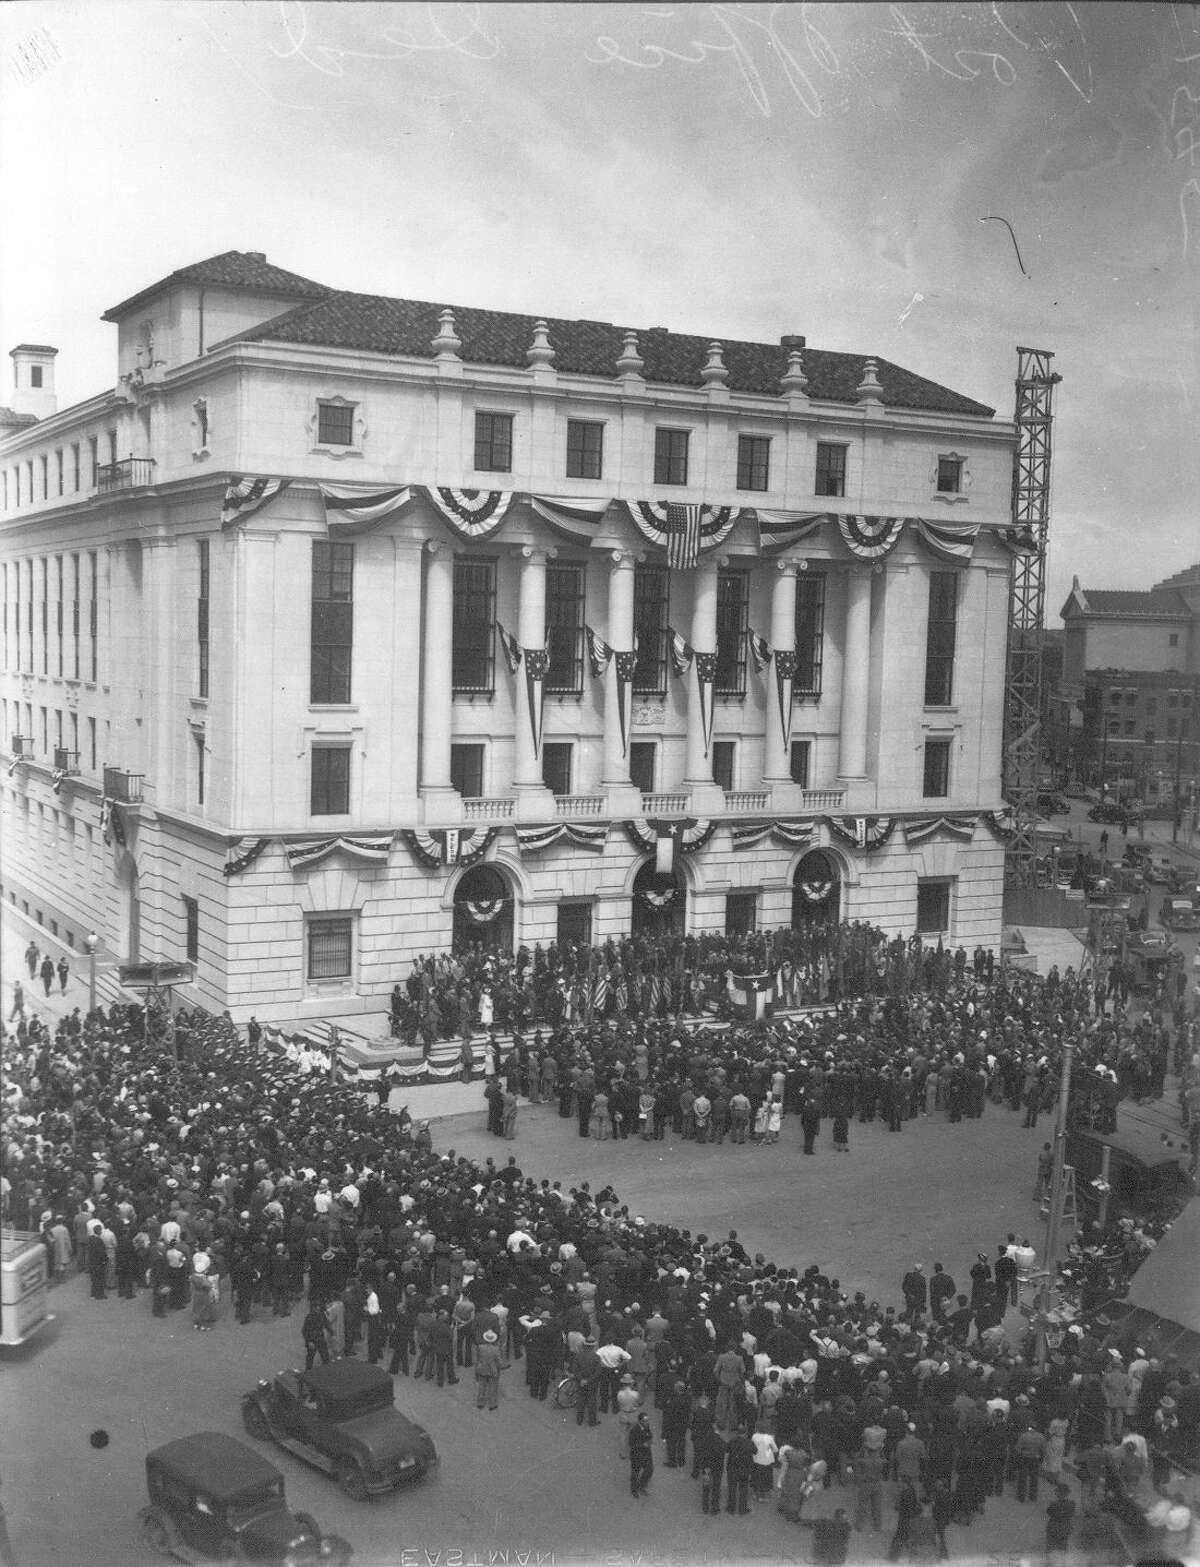 View of the crowd gathered in front of the Post Office for its dedication on March 24, 1937. Source: UTSA Libraries Special Collections, the Light Collection